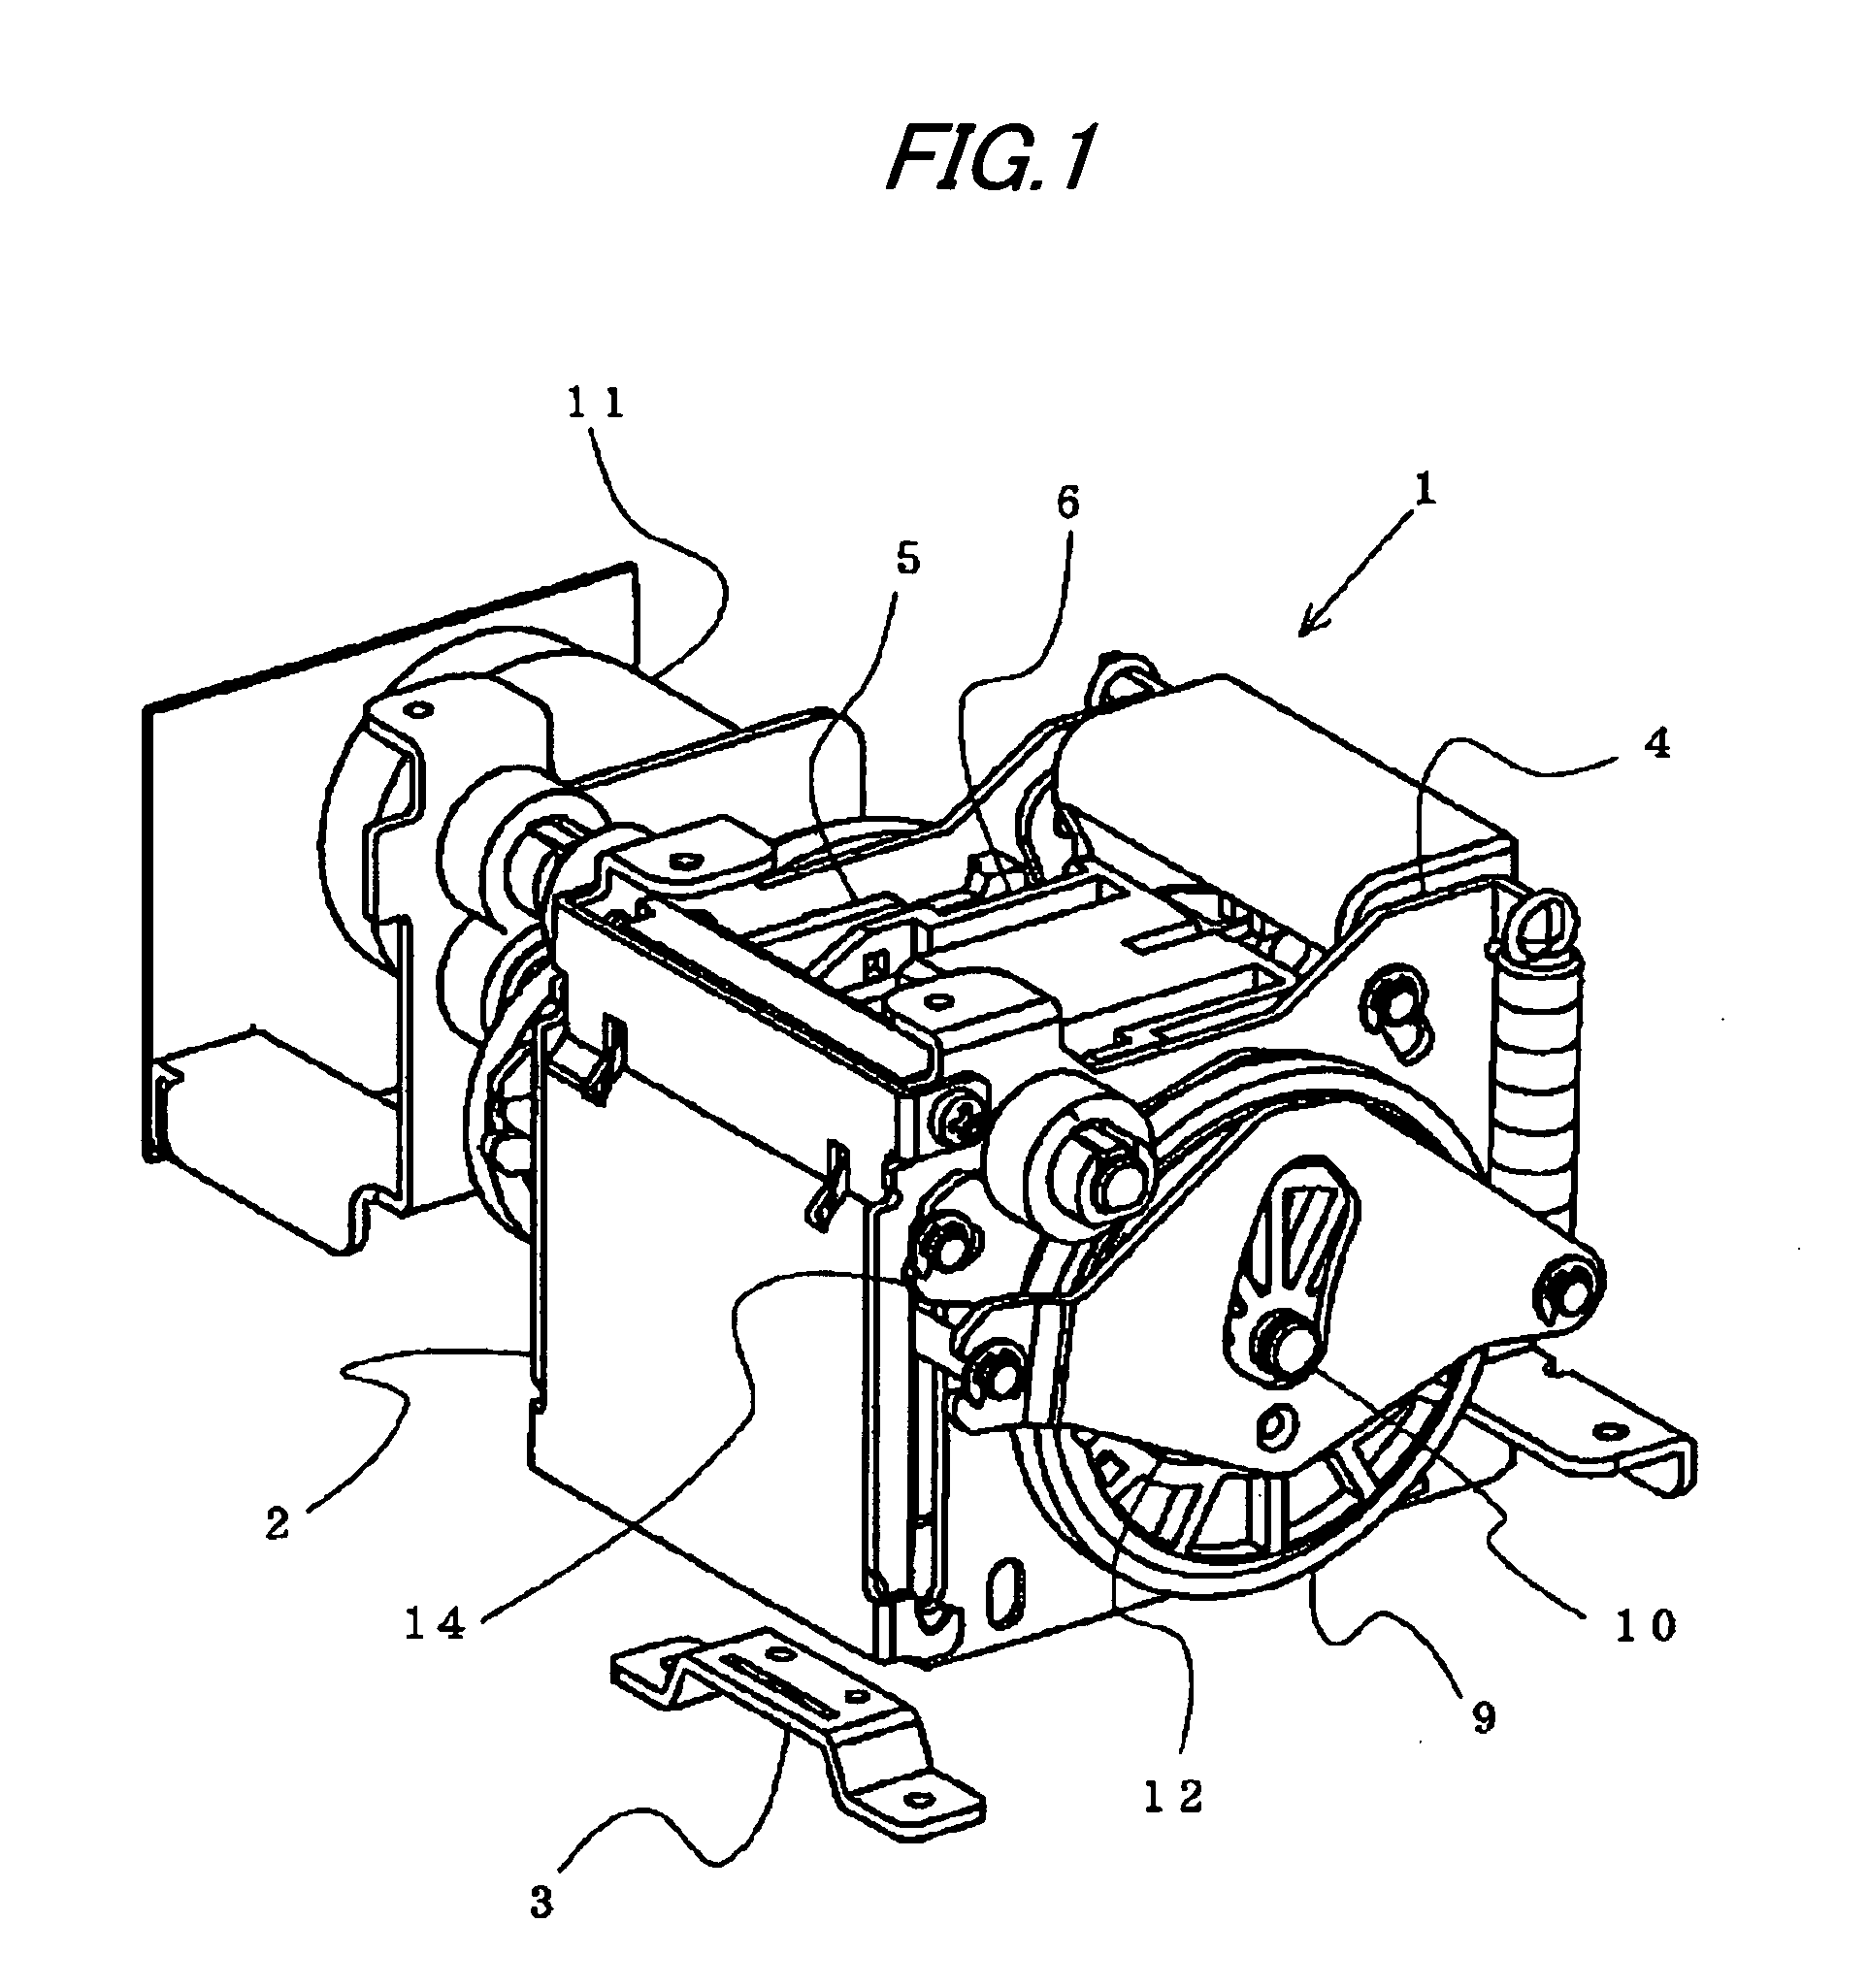 Electrically driven stapler